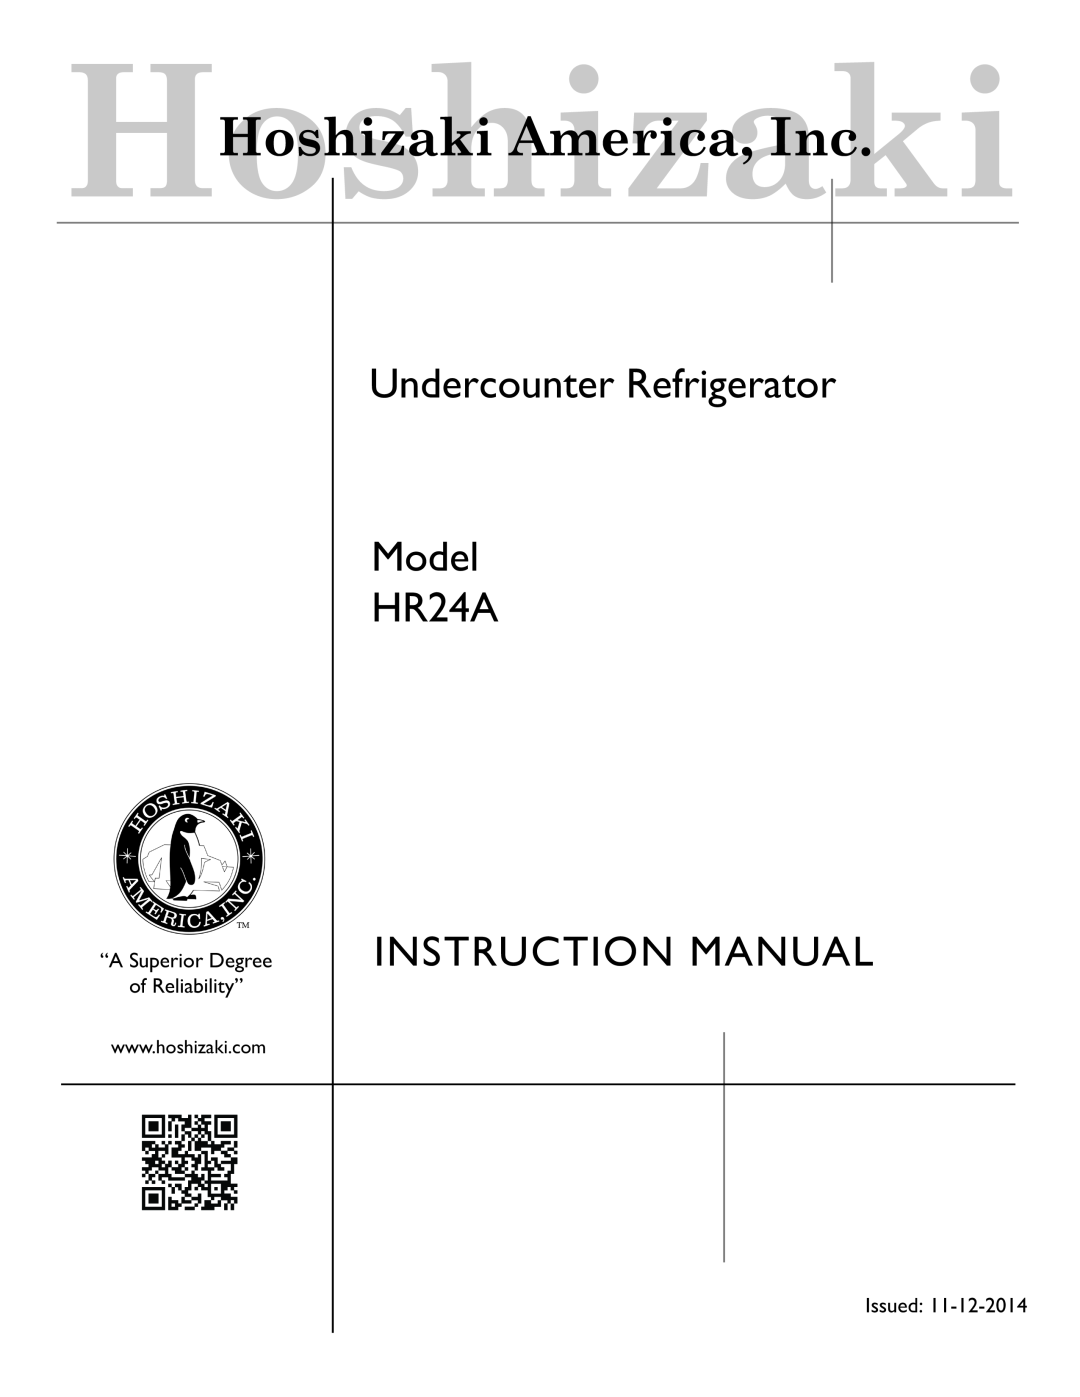 Hoshizaki service manual Undercounter Refrigerator Model HR24A, “A Superior Degree of Reliability”, Number Issued 